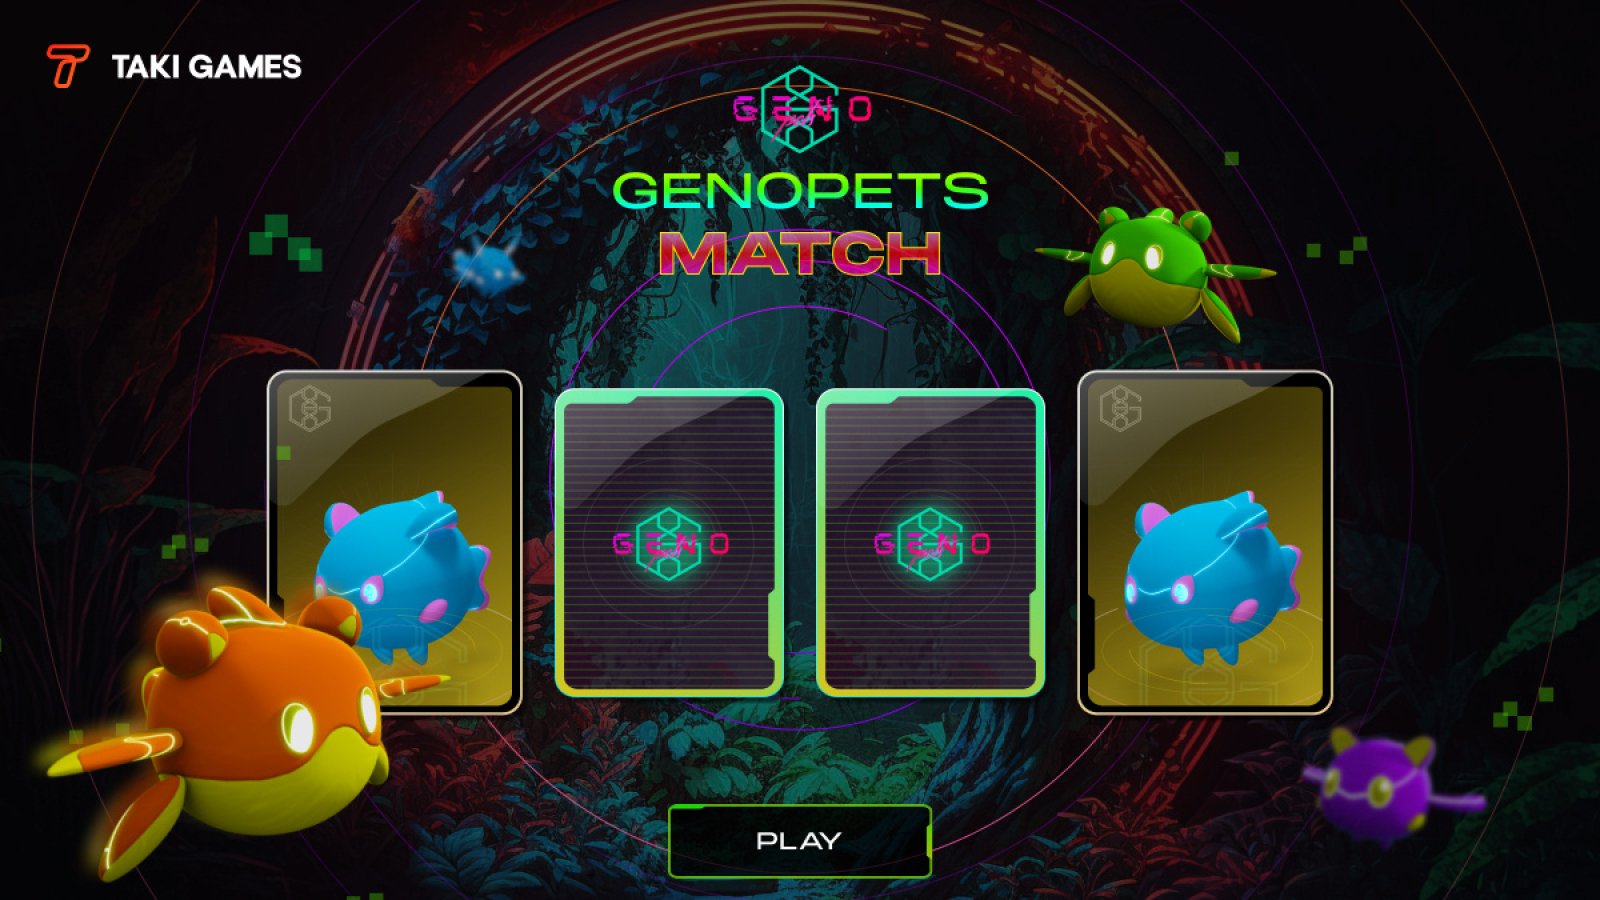 Taki Games & Genopets Accelerate Mainstream Adoption Of Web3 On Solana With “Genopets Match”